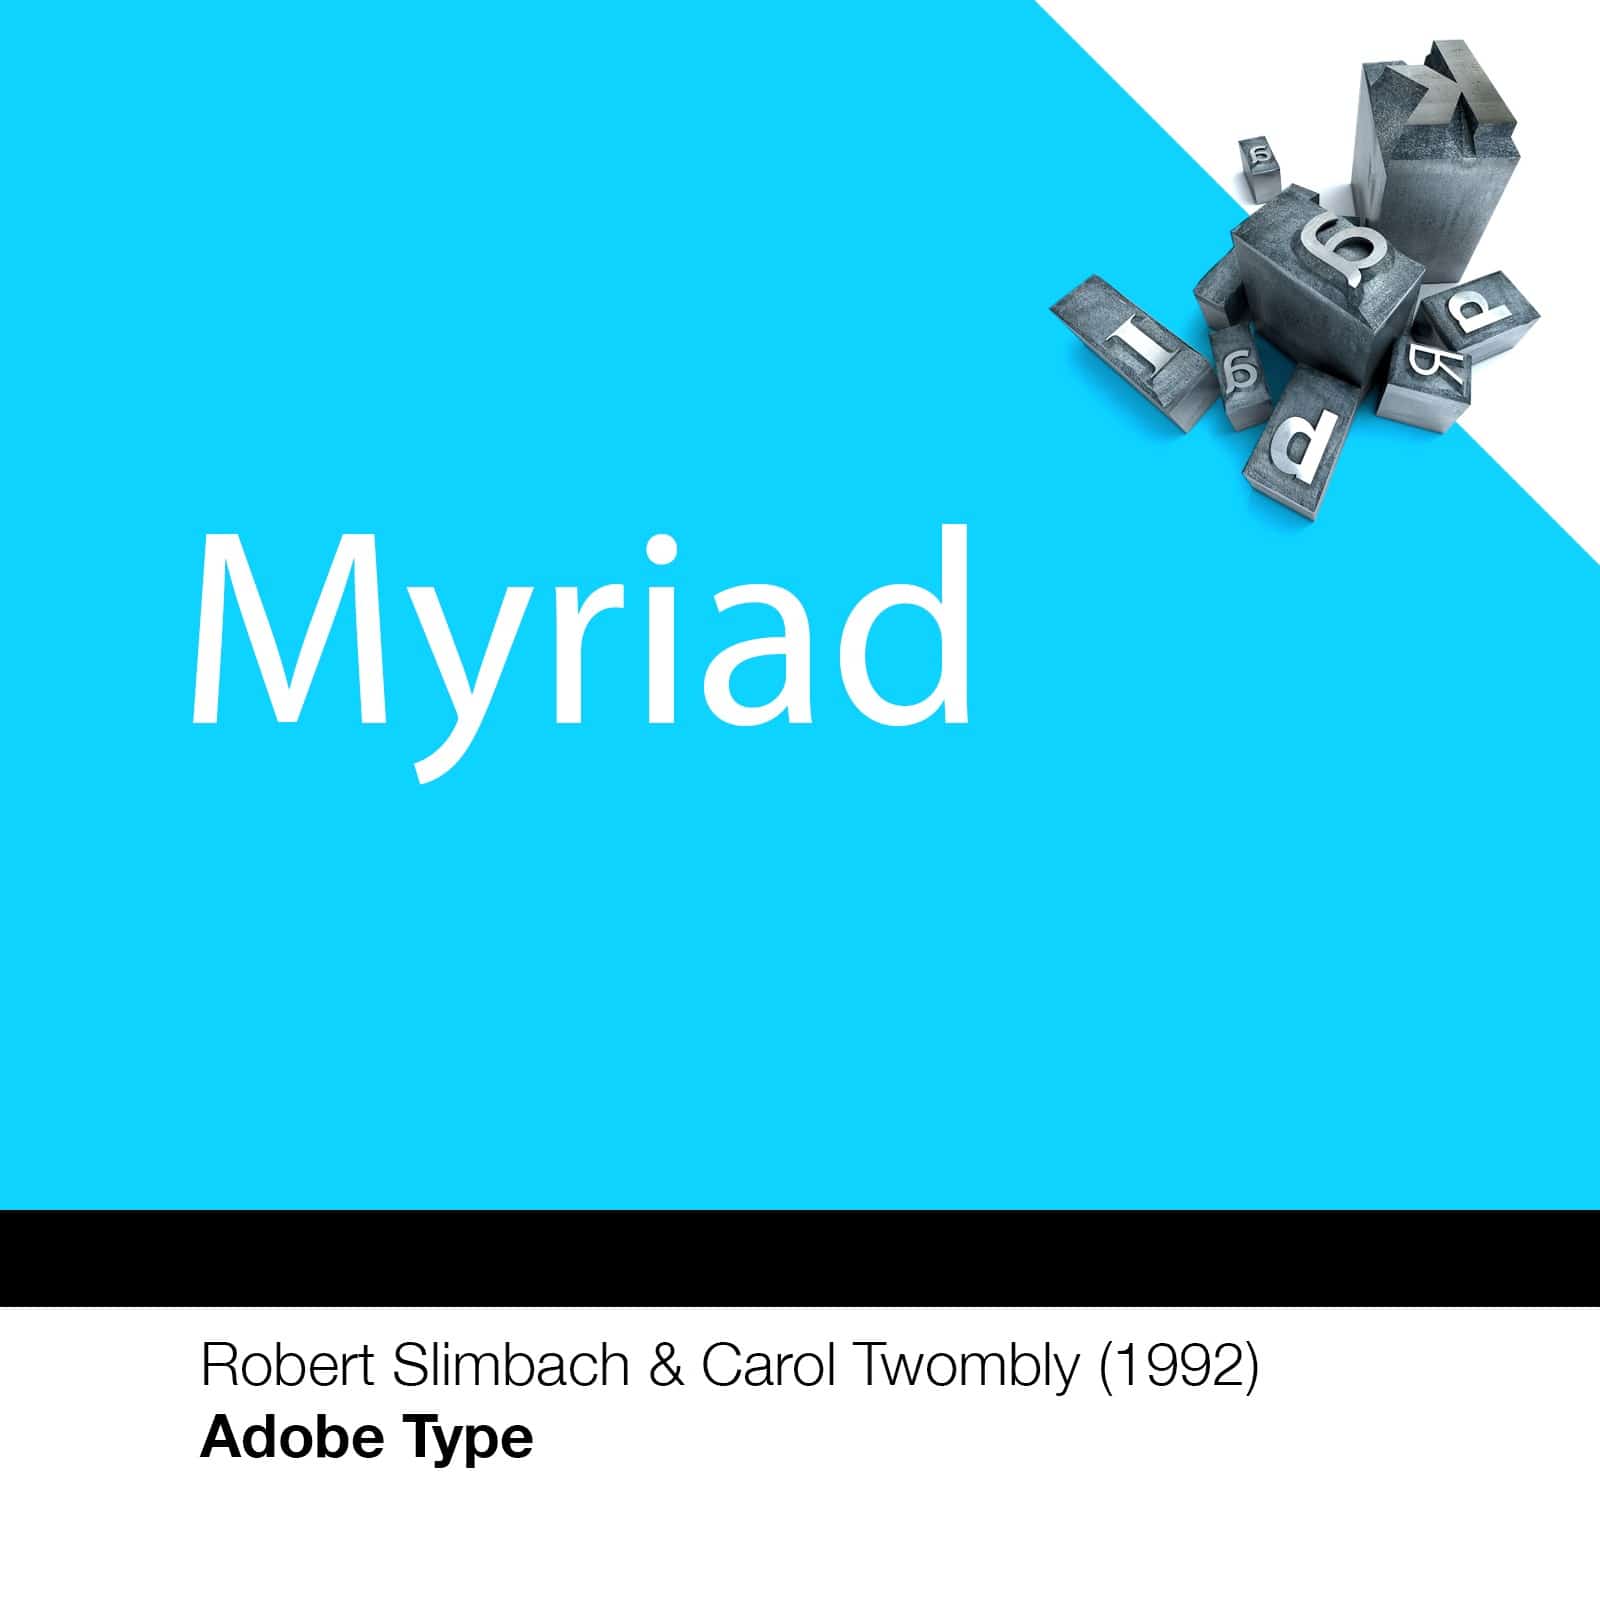 Download Myriad     [1992 - Carol Twombly & Robert Slimbach] font (typeface)